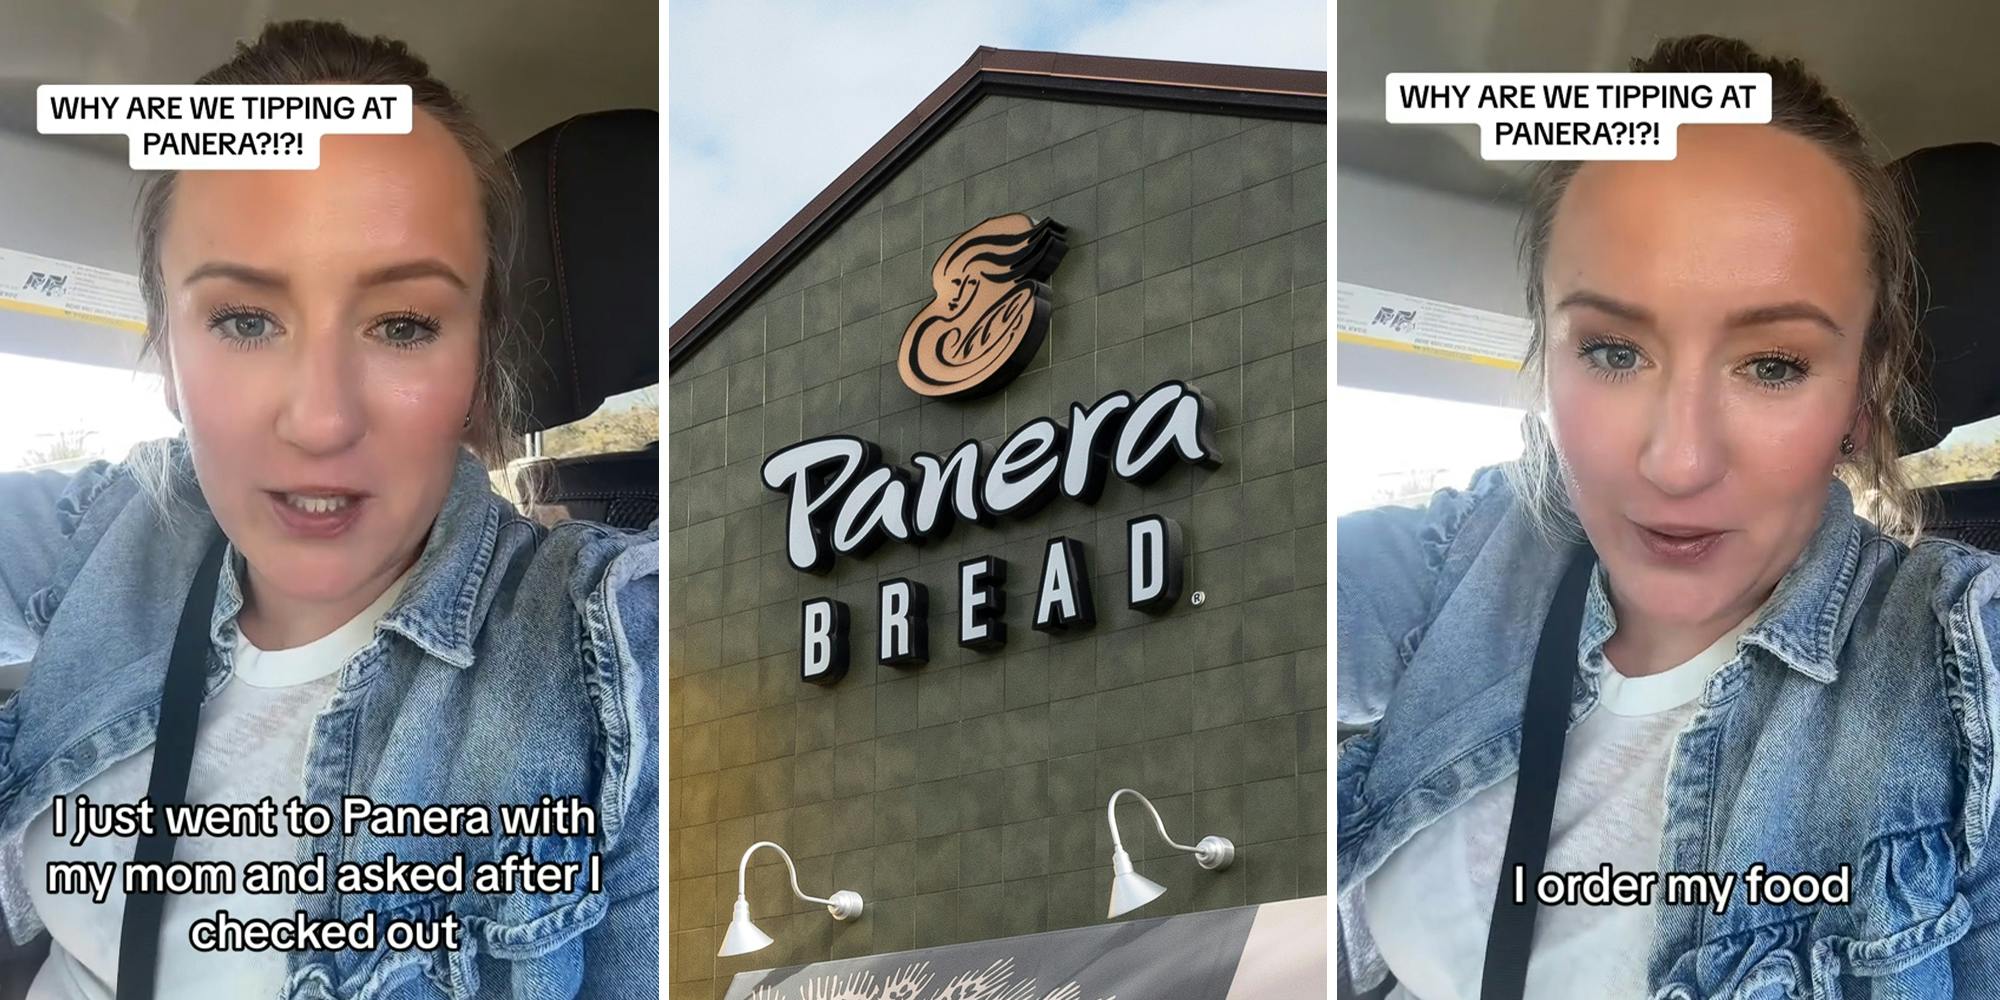 Woman questions why Panera is asking for tips